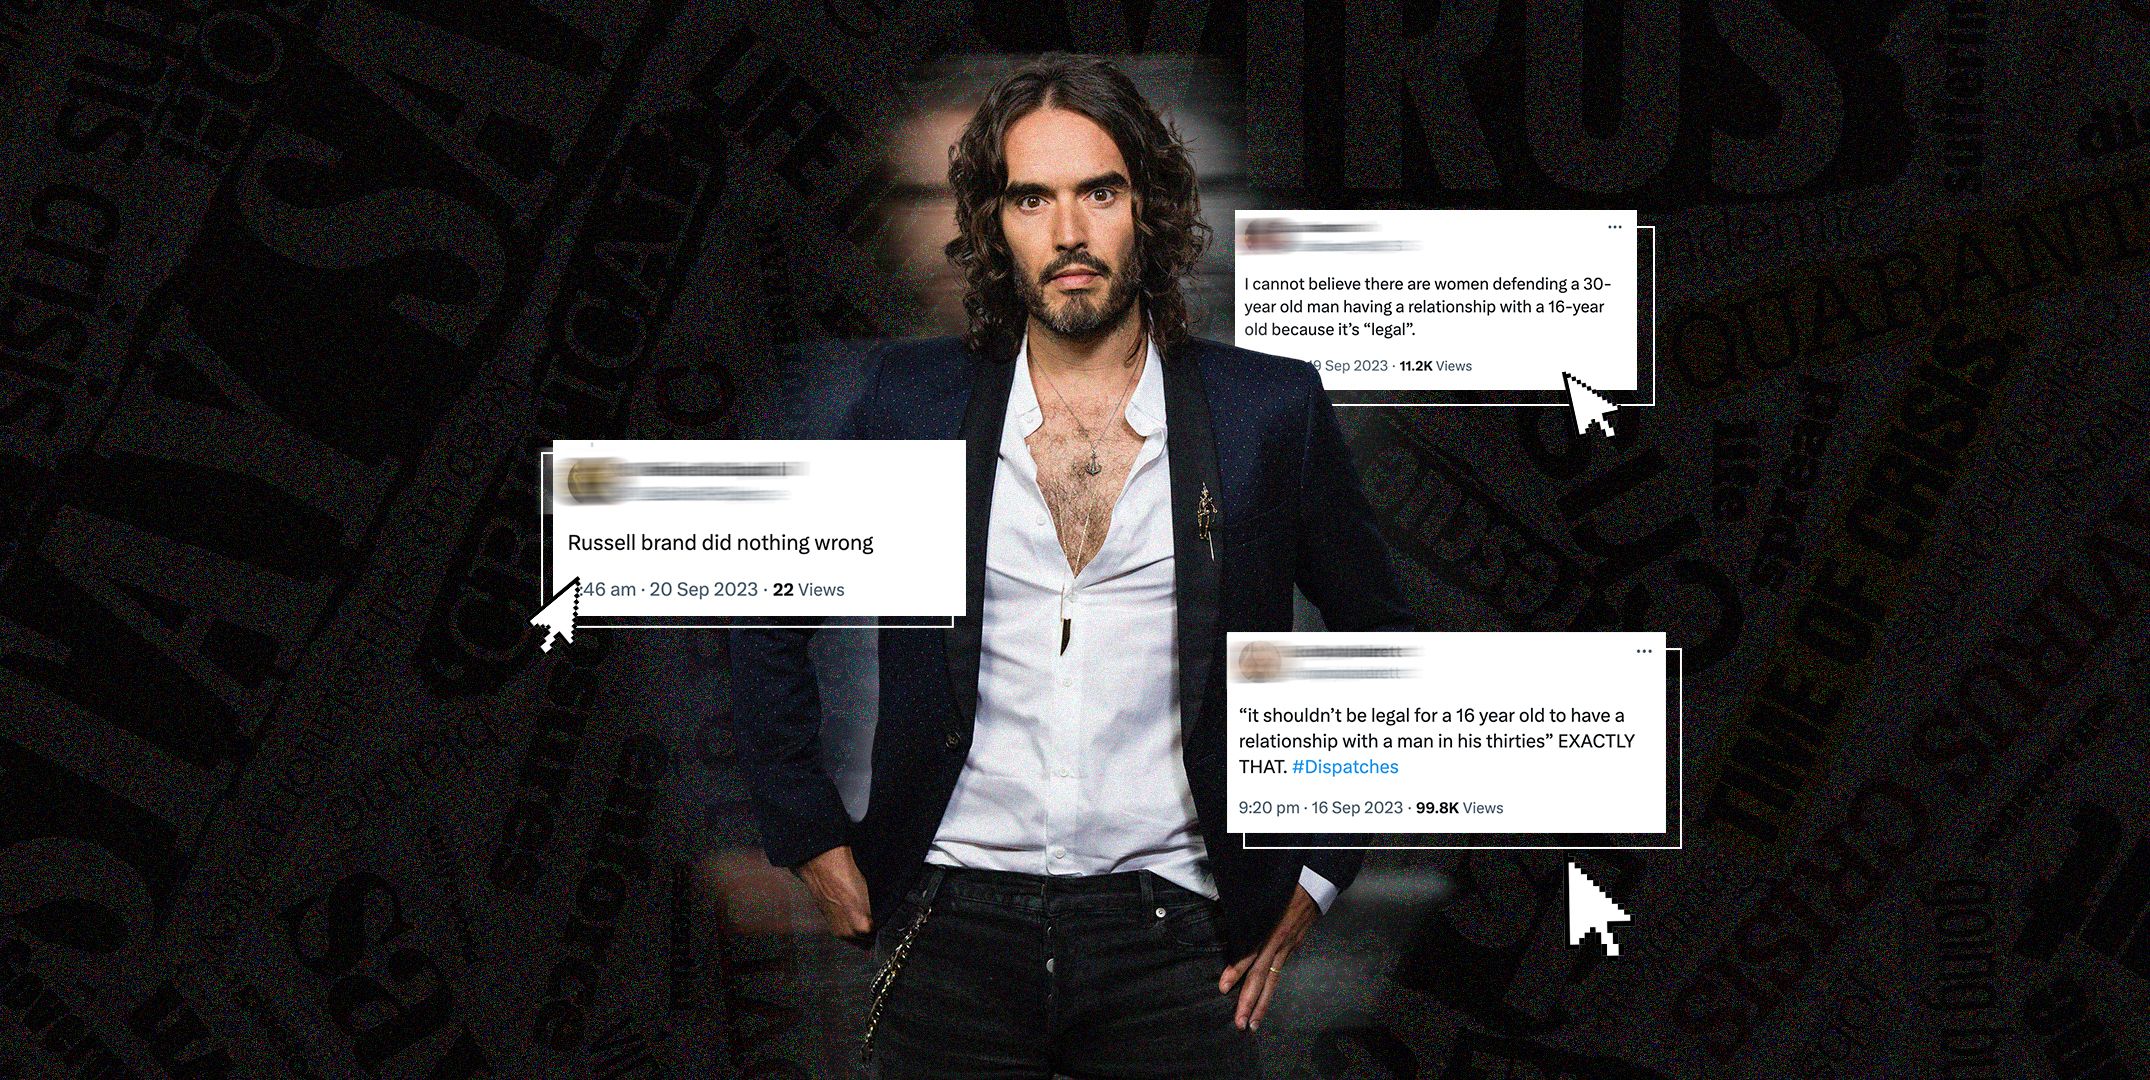 Russell Brand: Do we need to change the UK's age of consent?